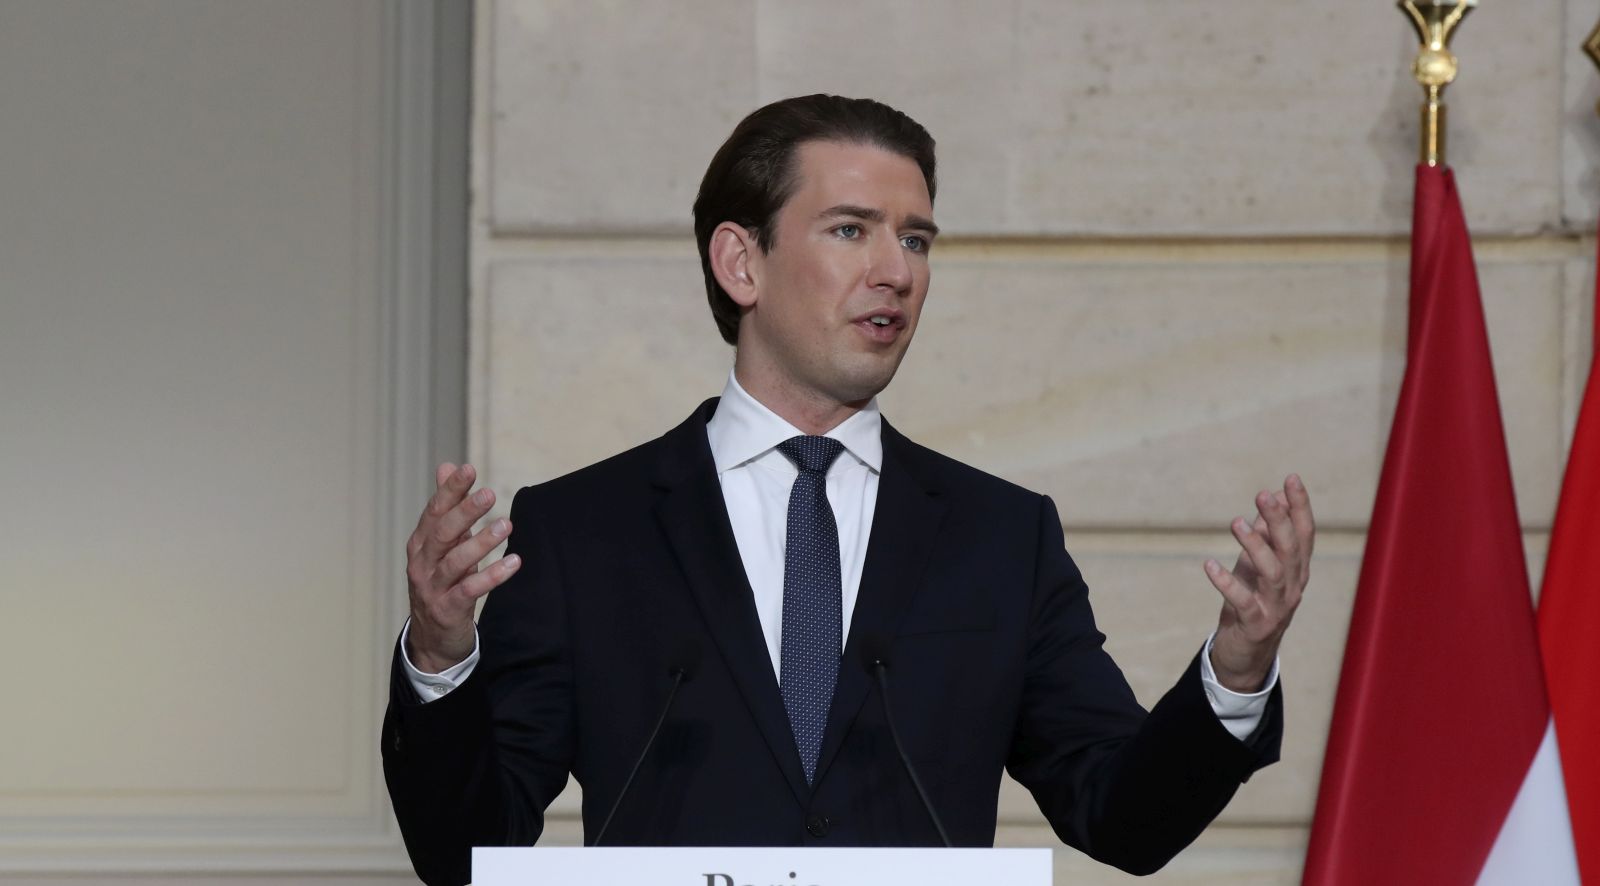 epa08811822 Austrian Chancellor Sebastian Kurz delivers his speech during a conference with French President Emmanuel Macron and a videoconference with Dutch Prime Minister Mark Rutte, German Chancellor Angela Merkel, European Council President Charles Michel and European Commission President Ursula von der Leyen at the Elysee Palace, in Paris, France, 10 November 2020. The leaders of France, Germany, Austria and the EU met to discuss Europe's response to terrorism threats after a string of attacks. Macron and Kurz are meeting in person after both of their countries have lost lives to Islamic extremist attackers in recent weeks.  EPA/MICHEL EULER / POOL MAXPPP OUT